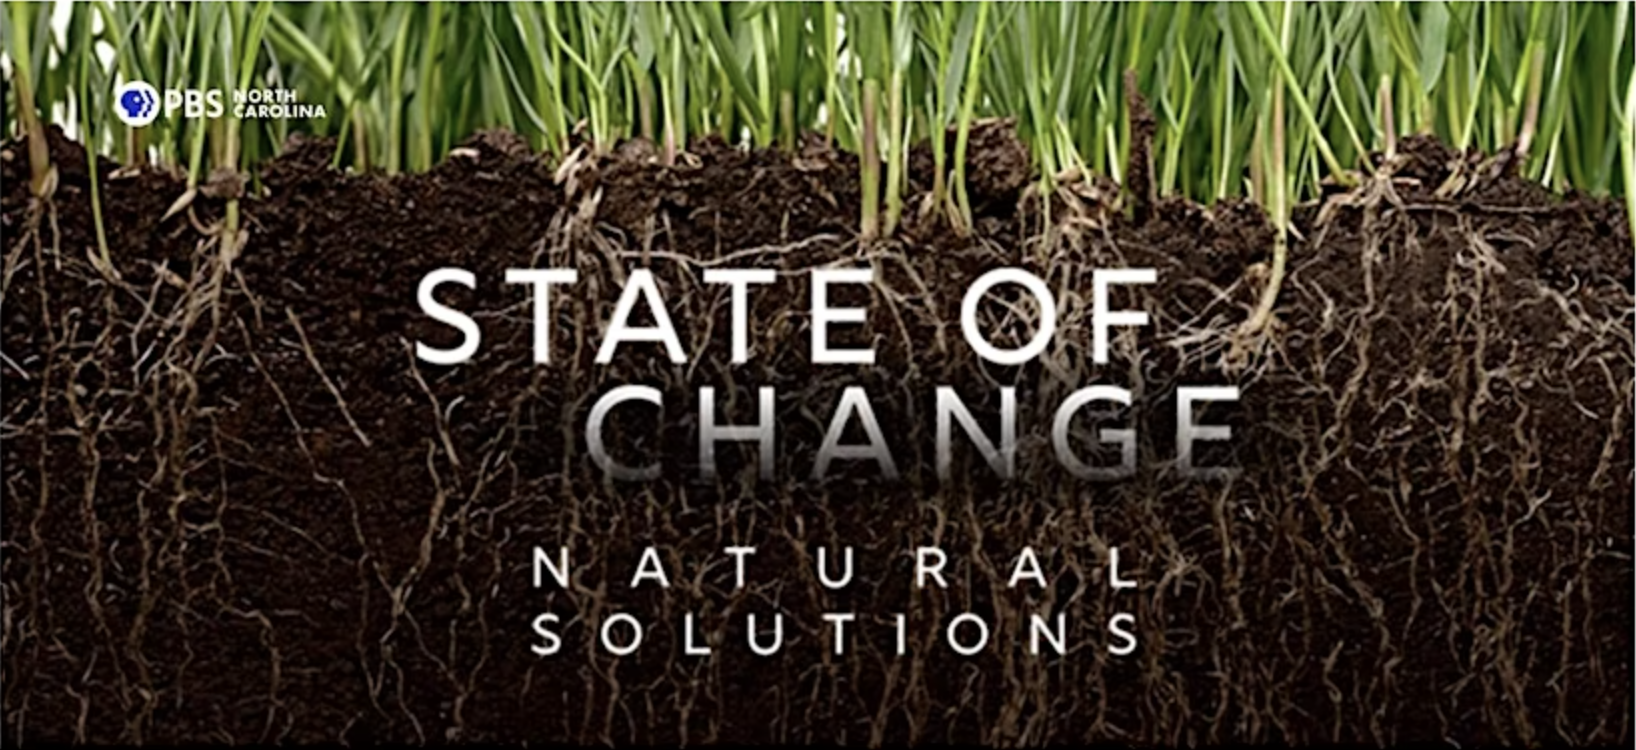 Graphic of grass with roots showing in a cross section of soil with the text "State of Change Natural Solutions" overlaid.